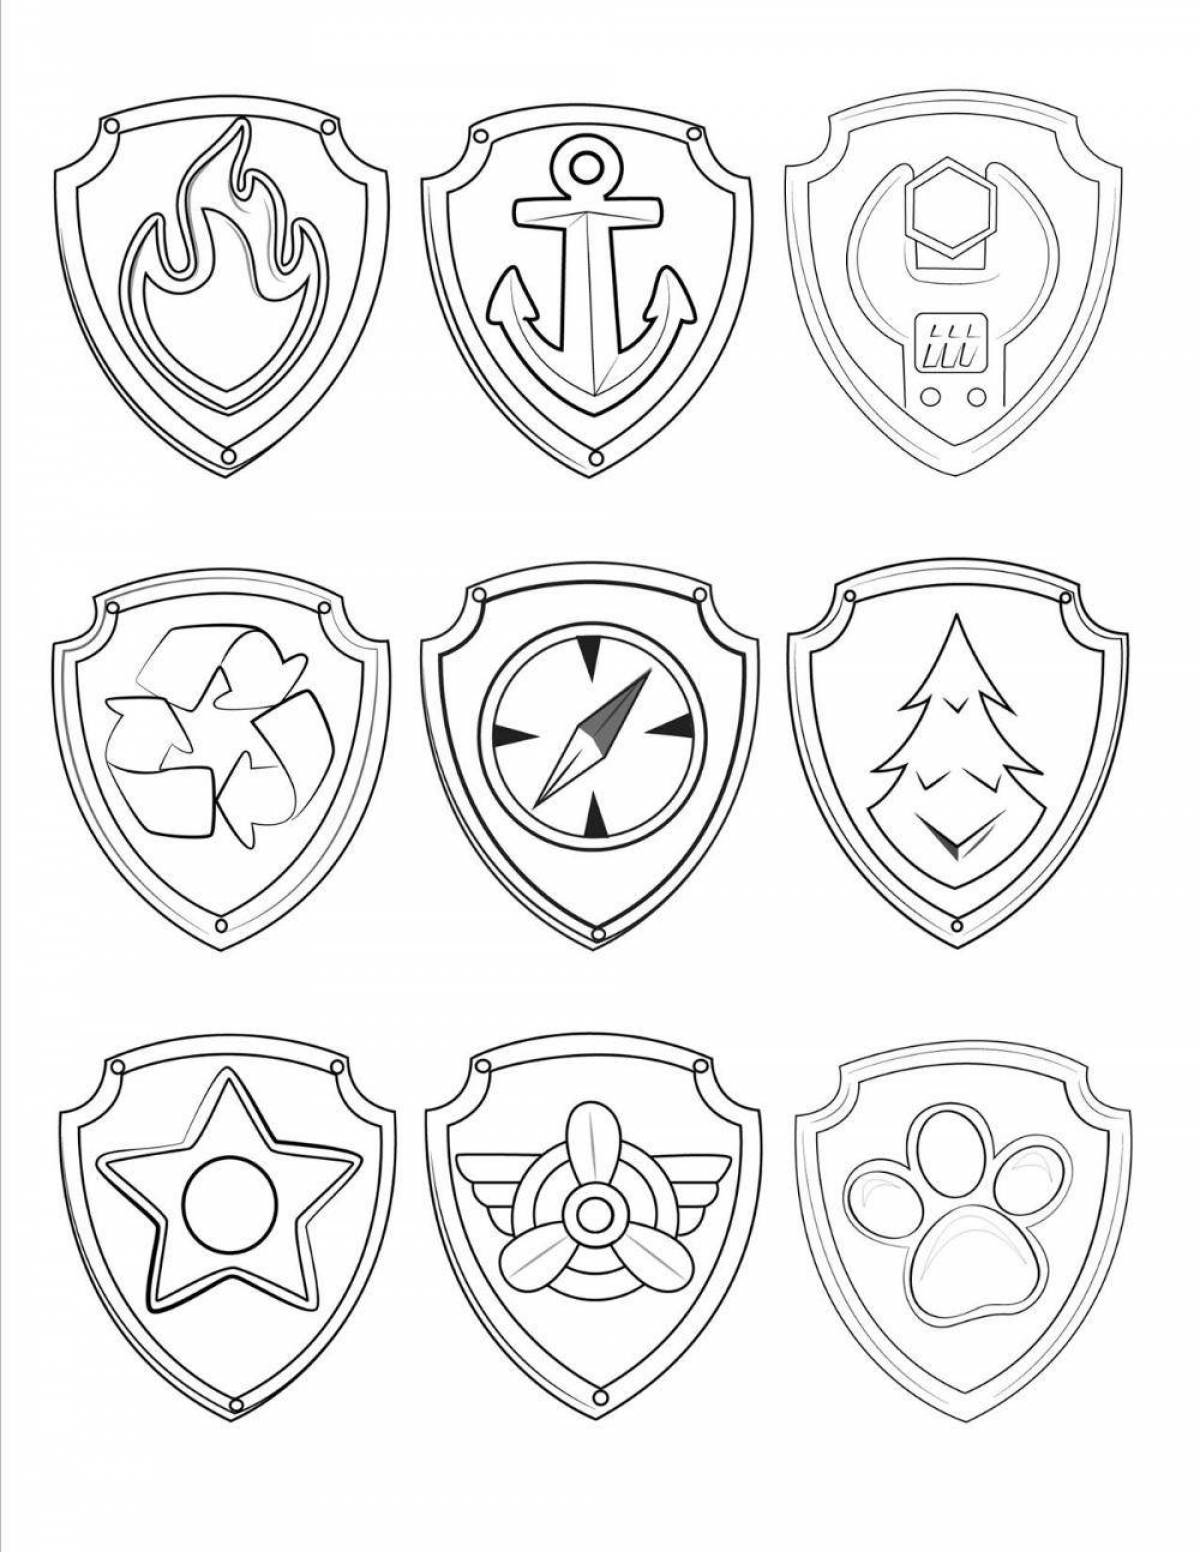 Exciting icon coloring page